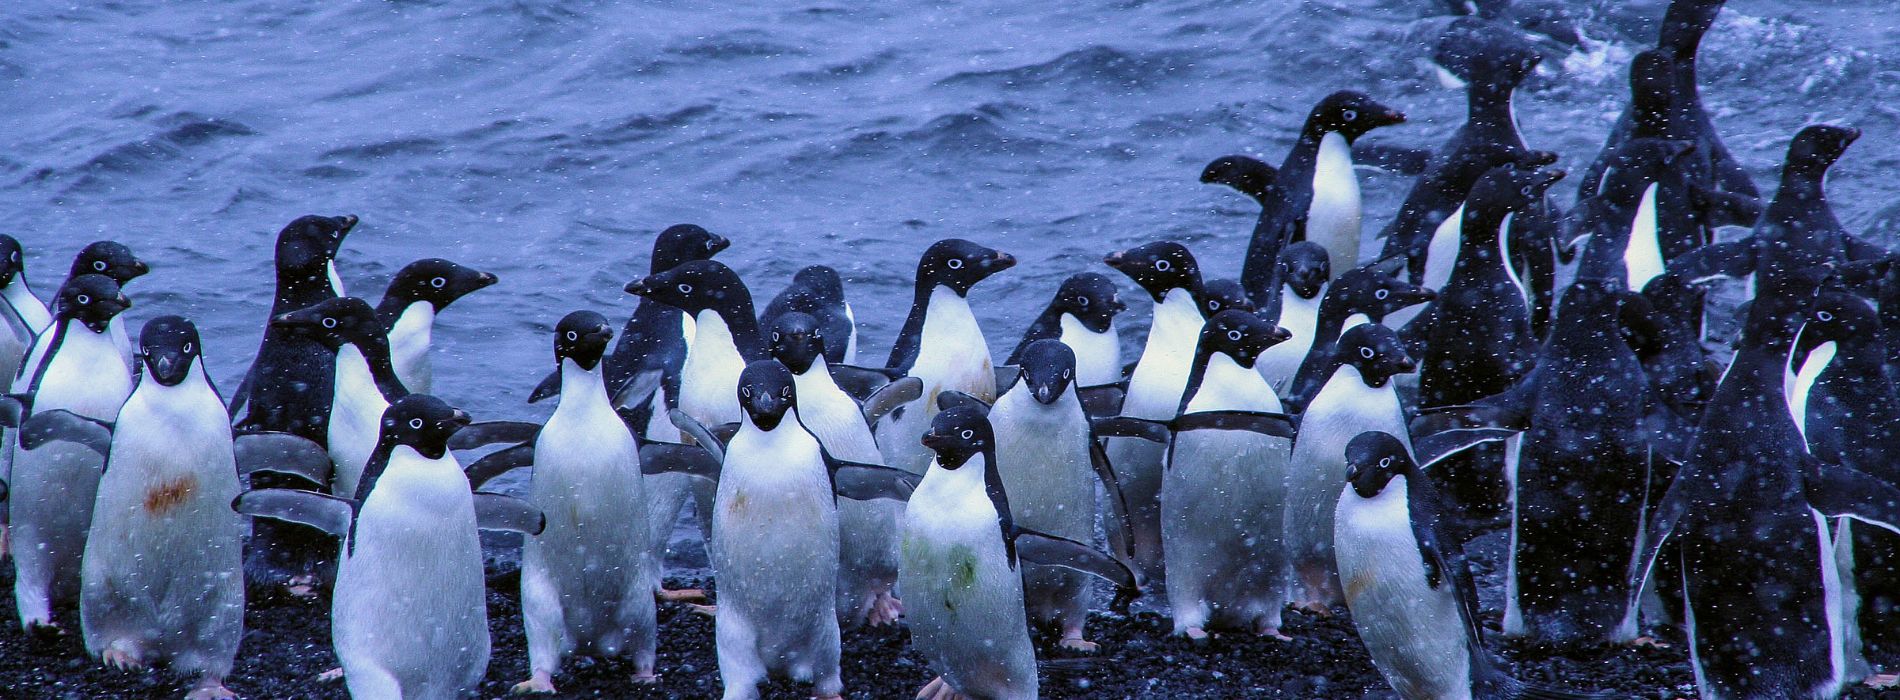 What do you call 50 penguins in the arctic?